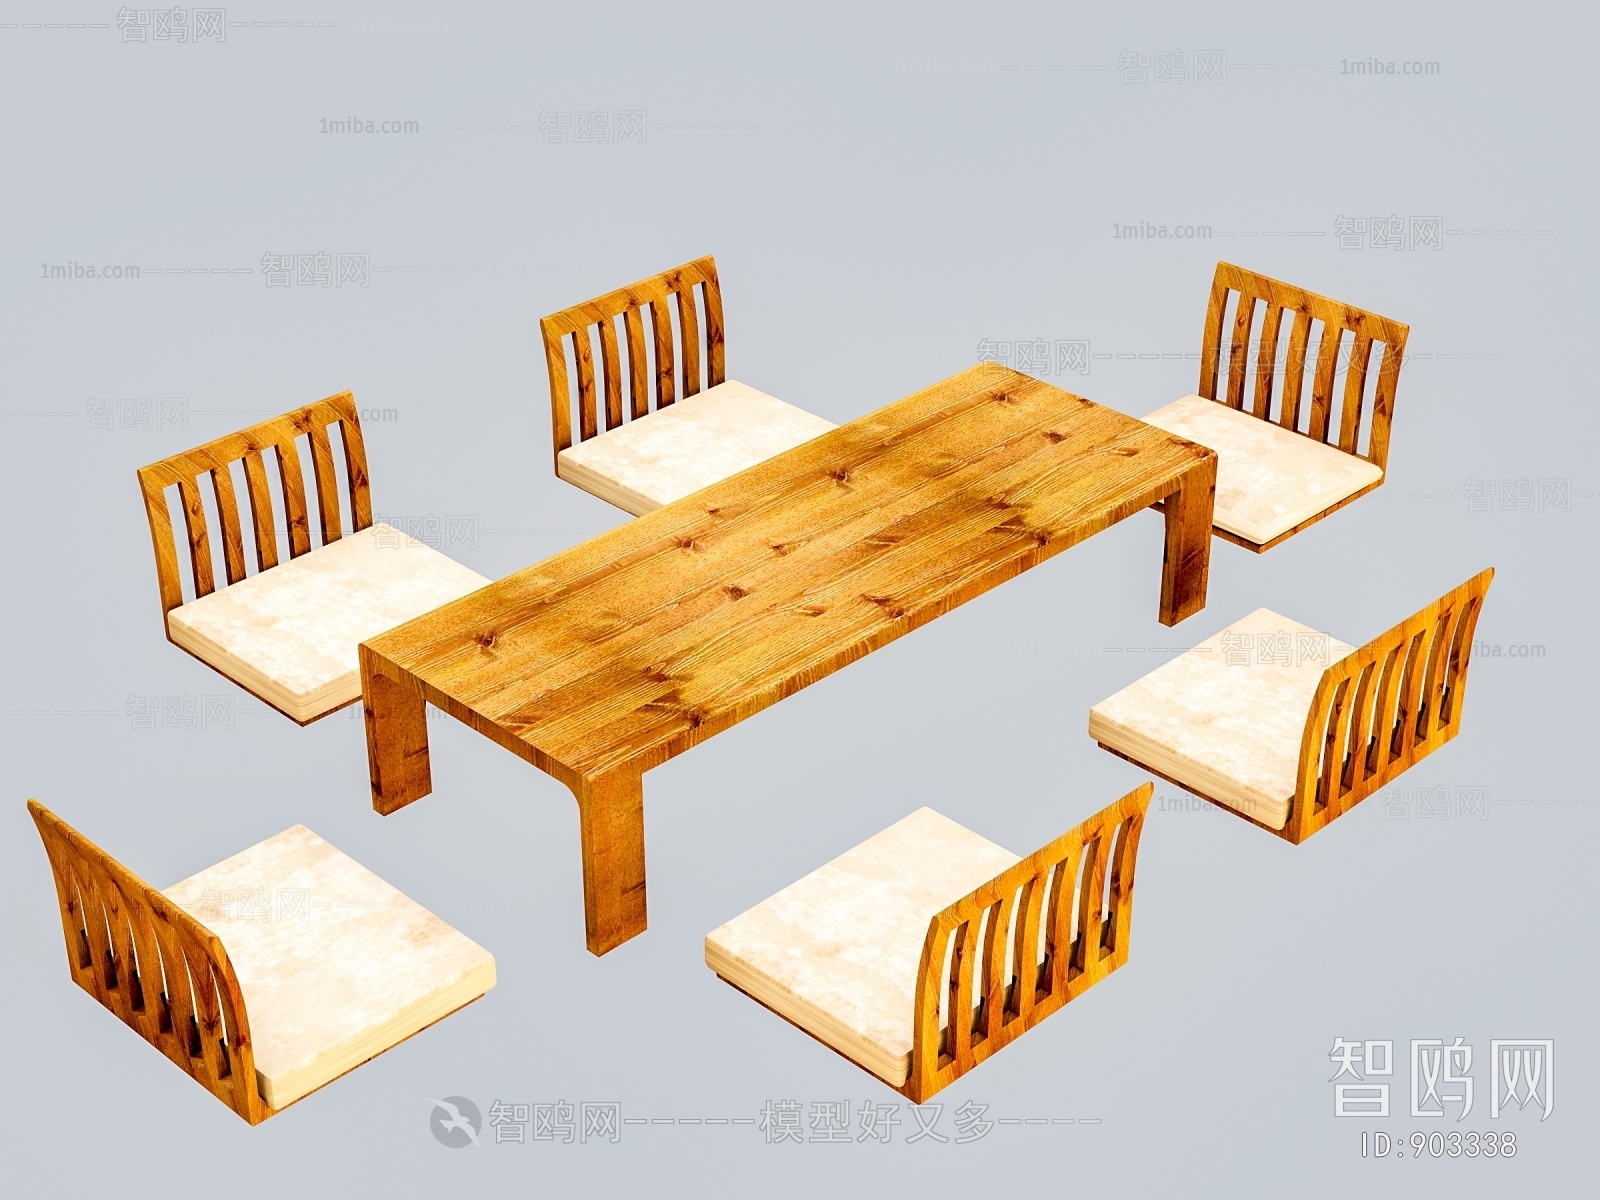 Japanese Style Dining Table And Chairs